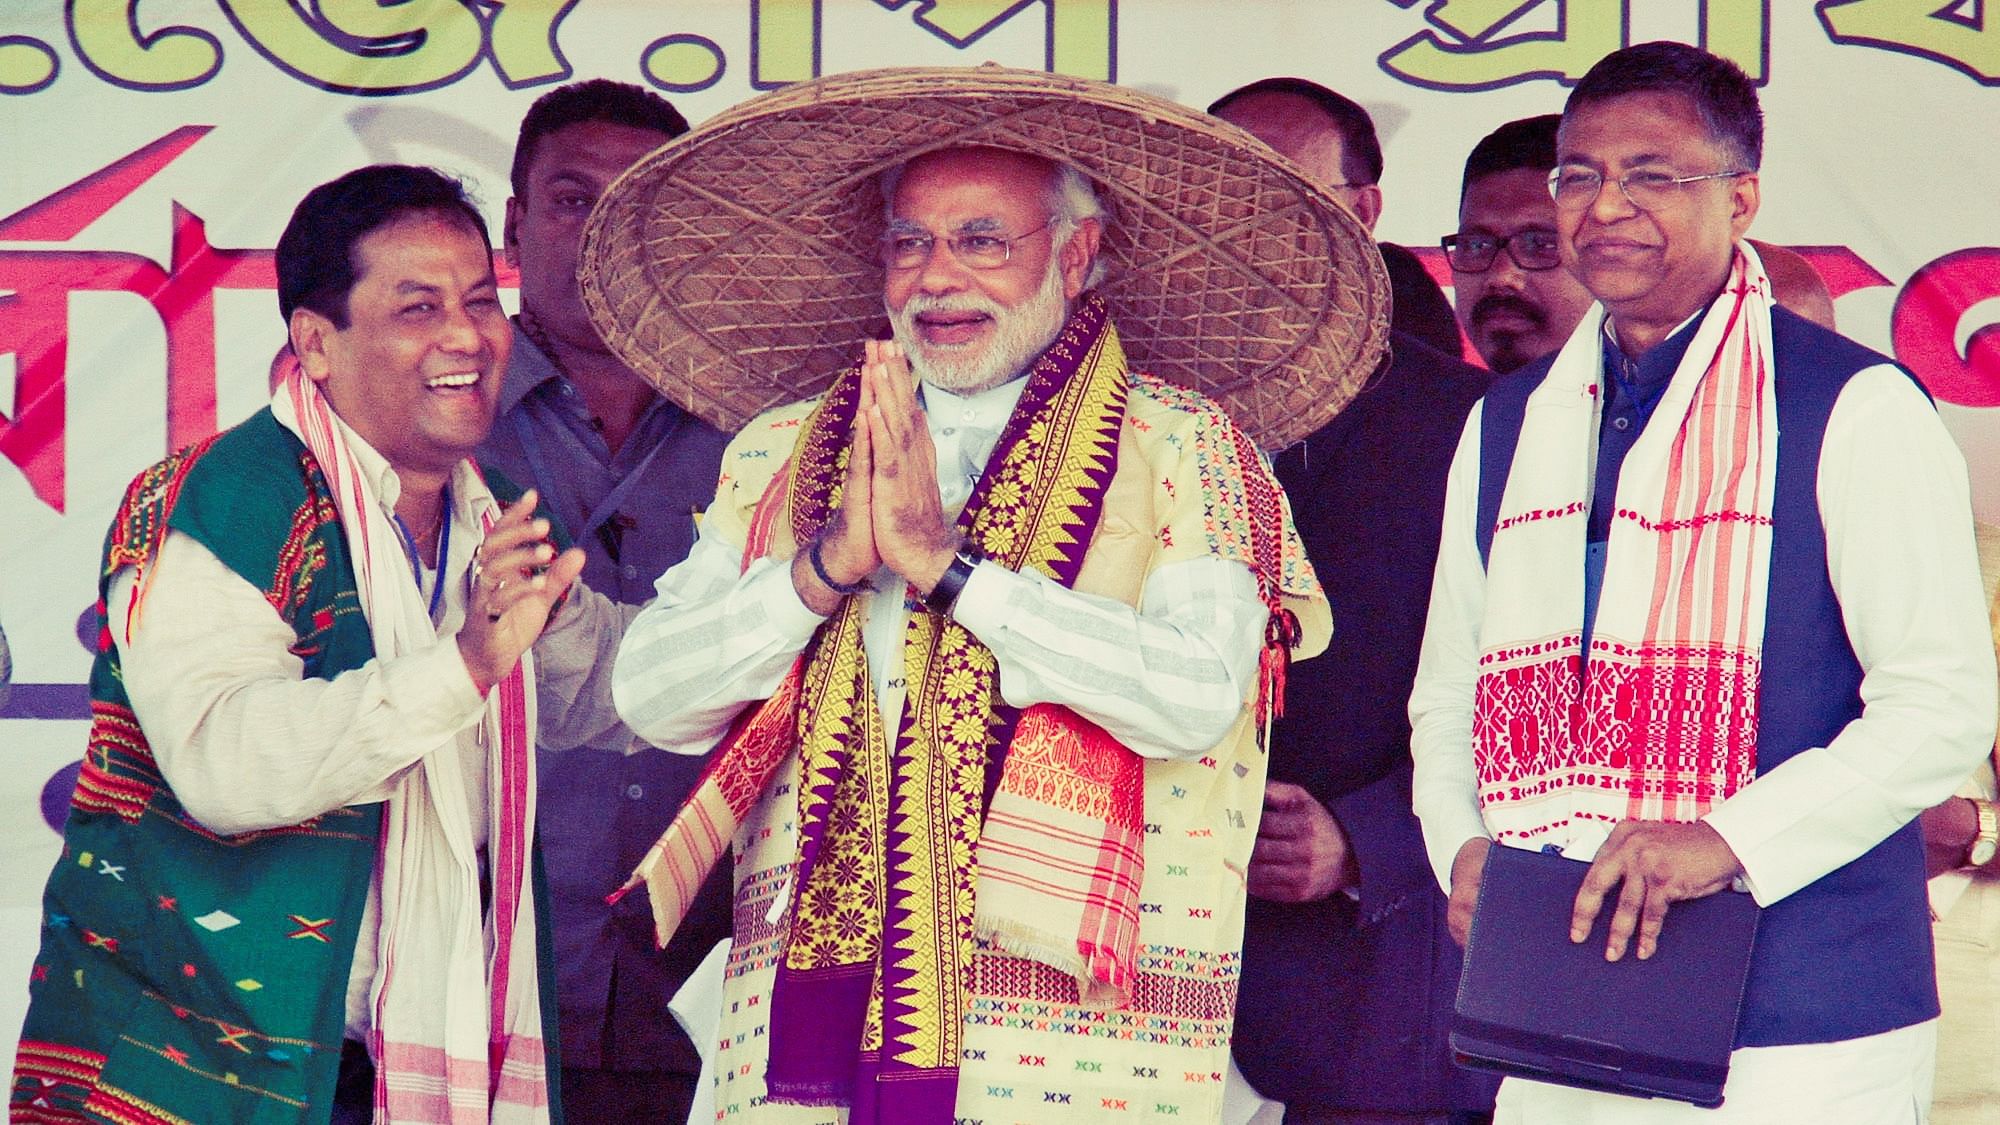 Narendra Modi wearing a “Japi” (a traditional hat of Assam) receives a wooden Rhino by his supporters during a rally ahead of the 2014 general elections, at Guwahati.&nbsp;